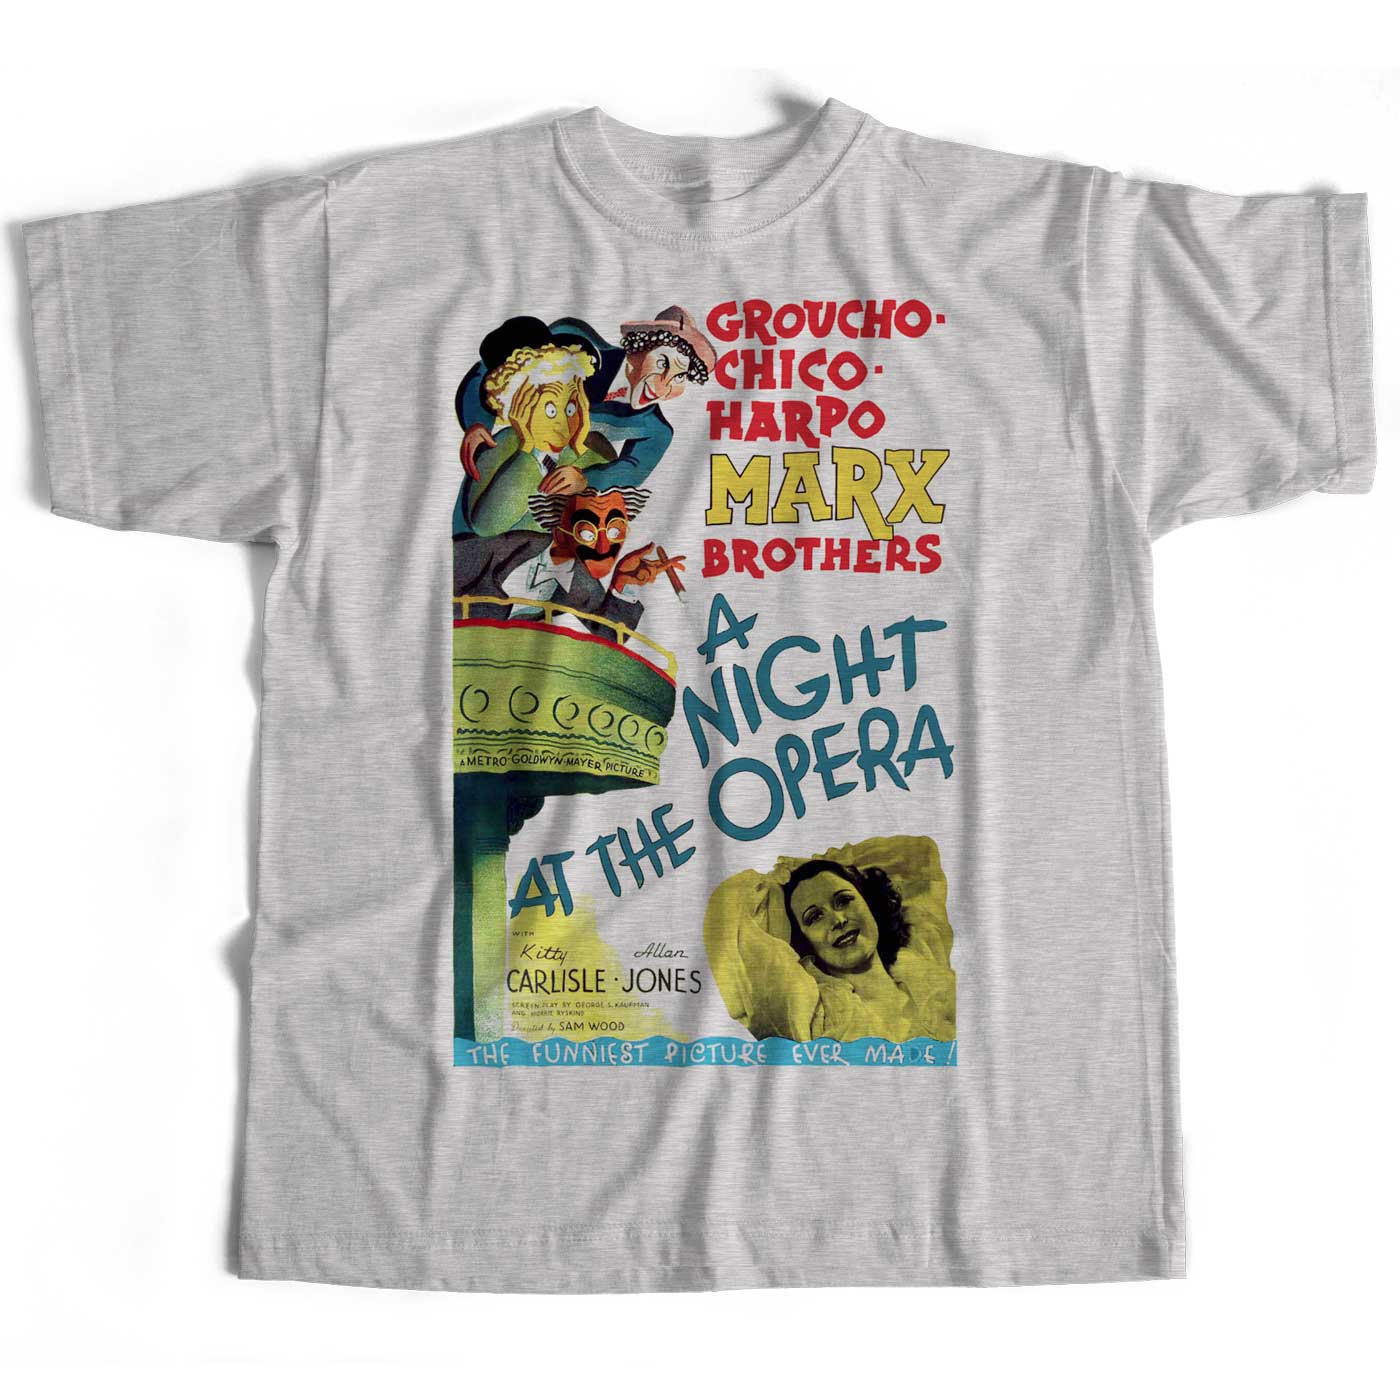 The Marx Brothers T Shirt - A Night At The Opera Poster